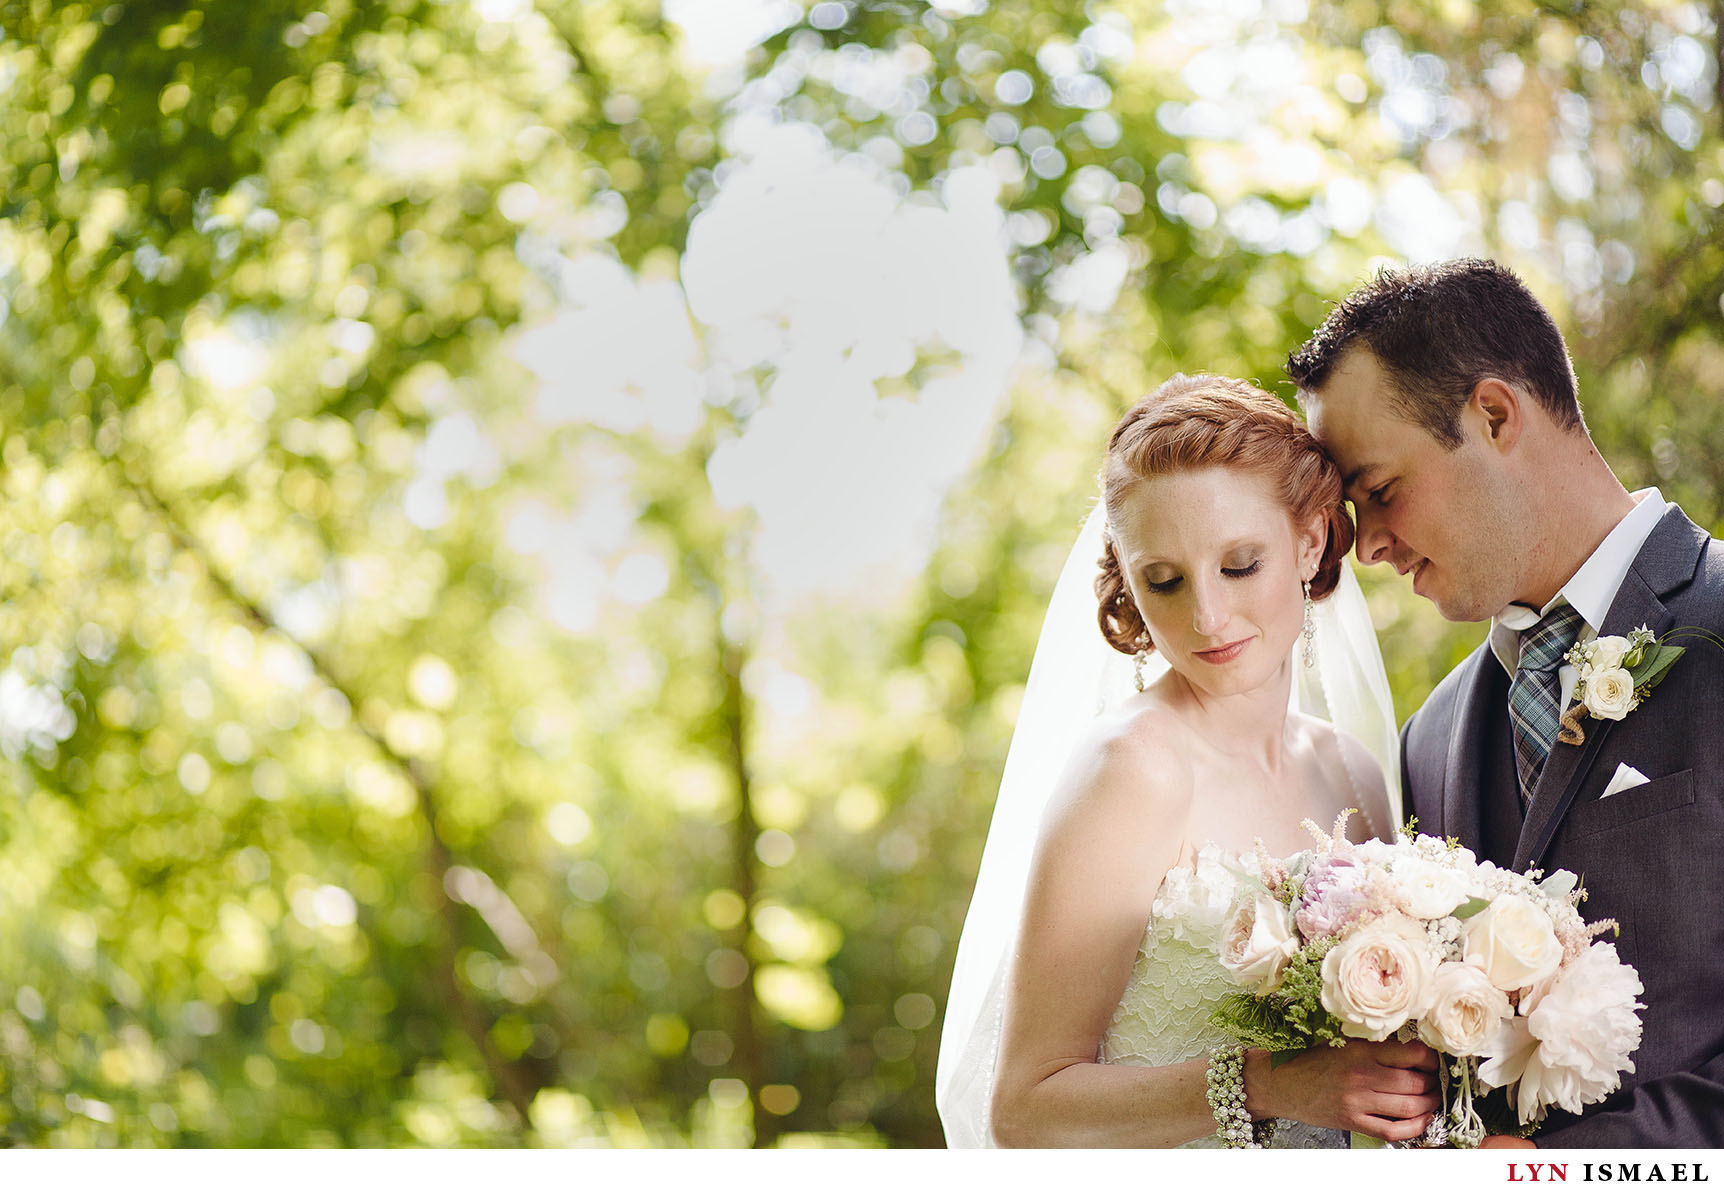 A beautiful portrait of a bride and groom who got married in Nithridge Estate.